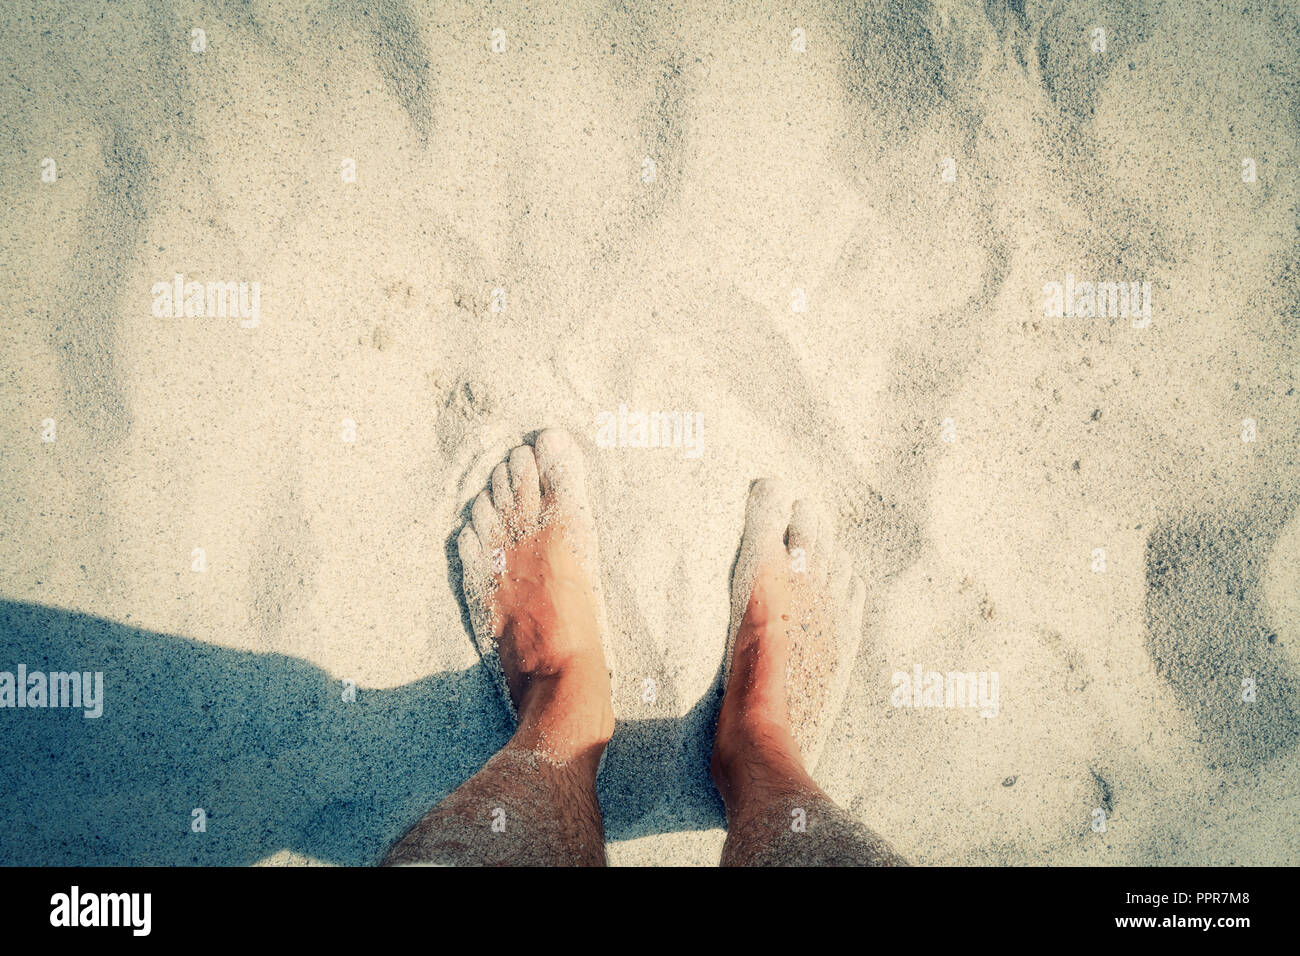 POV of a naked men's feet on the beach, touching the warm sand. Copyspace on the upper part. Mojo colors. Stock Photo